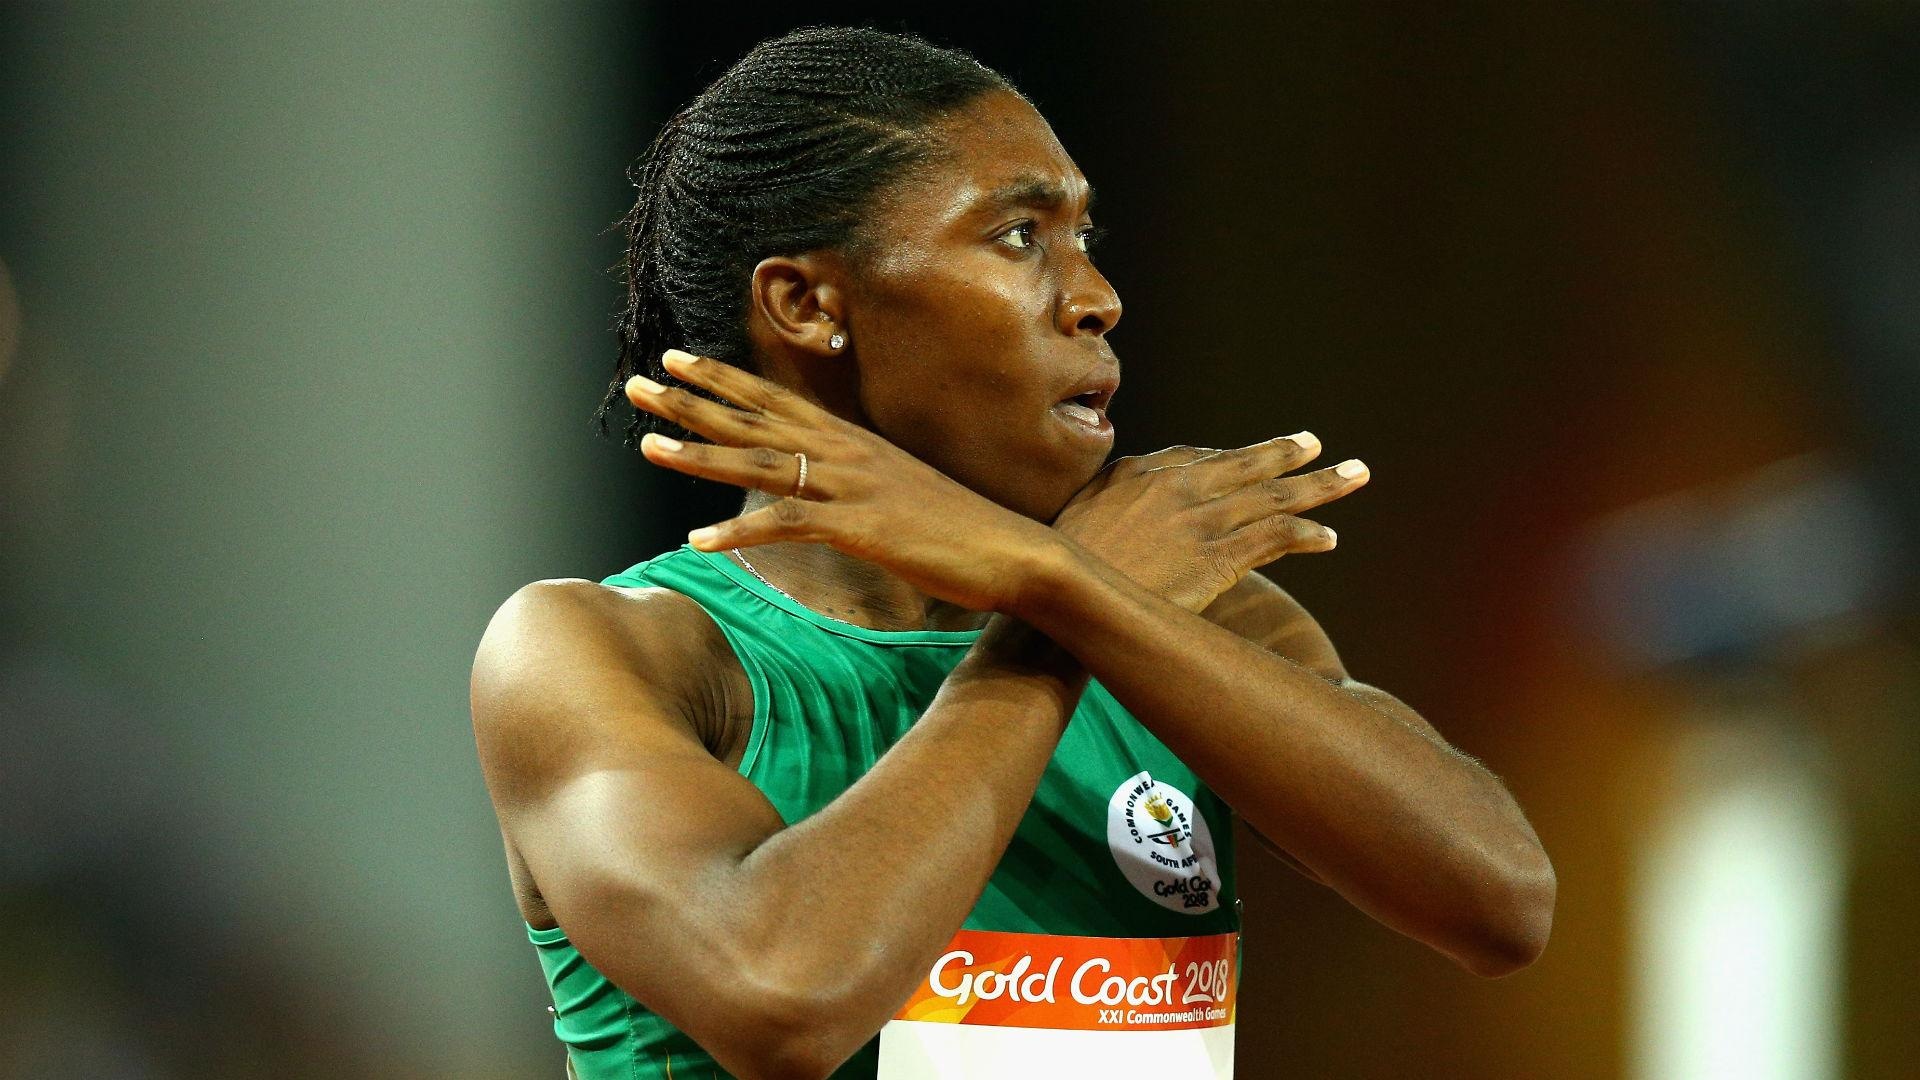 Caster Semenya, Strong and determined, Inspirational athlete, Dominance in sports, 1920x1080 Full HD Desktop